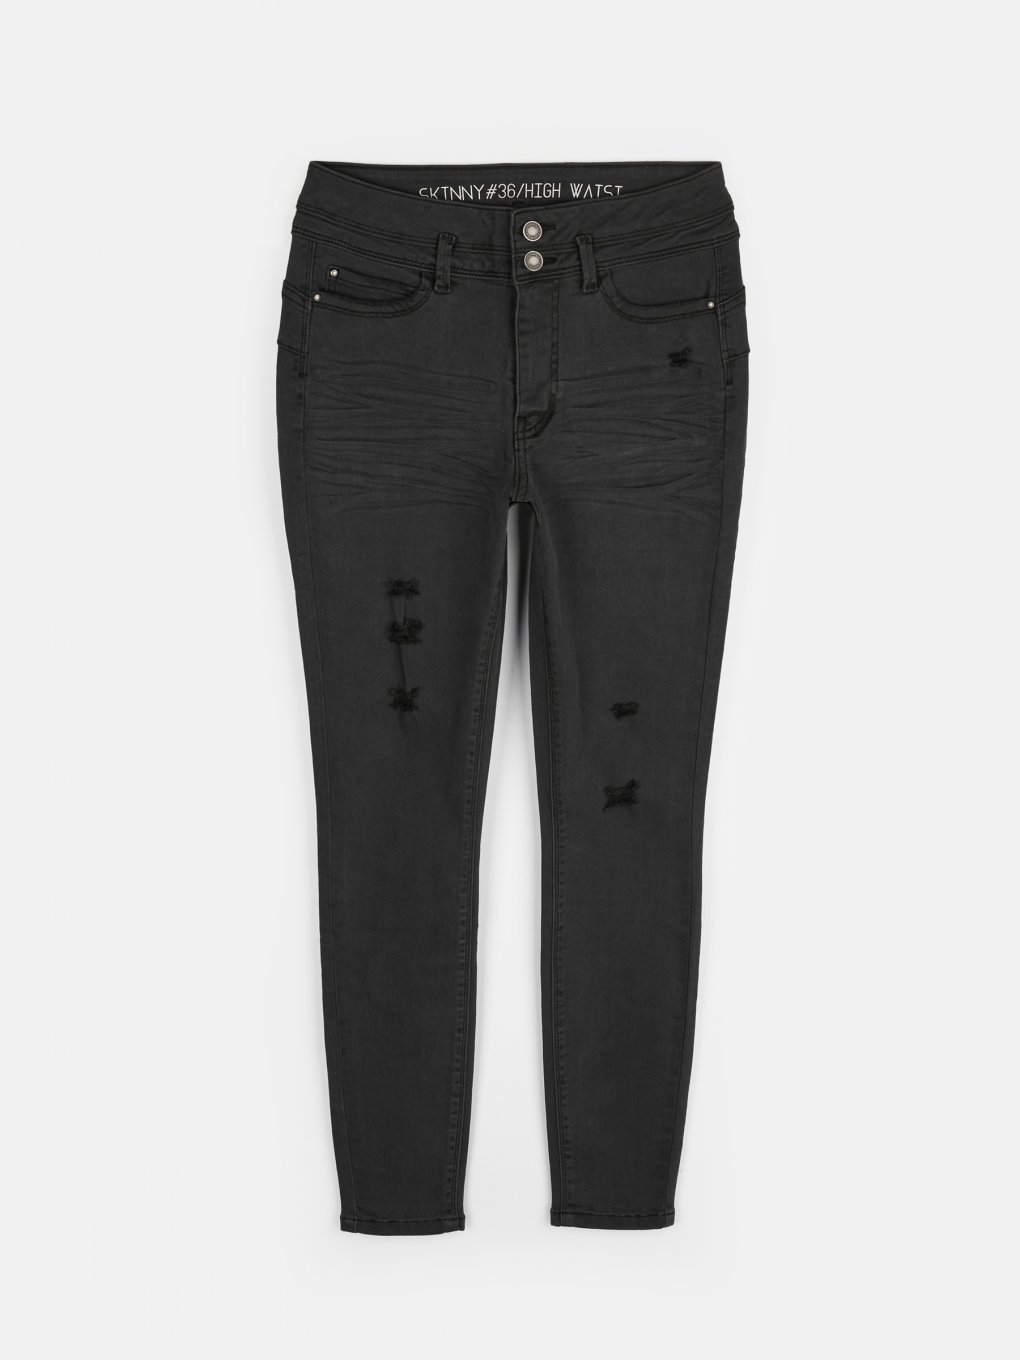 Distressed skinny push-up jeans